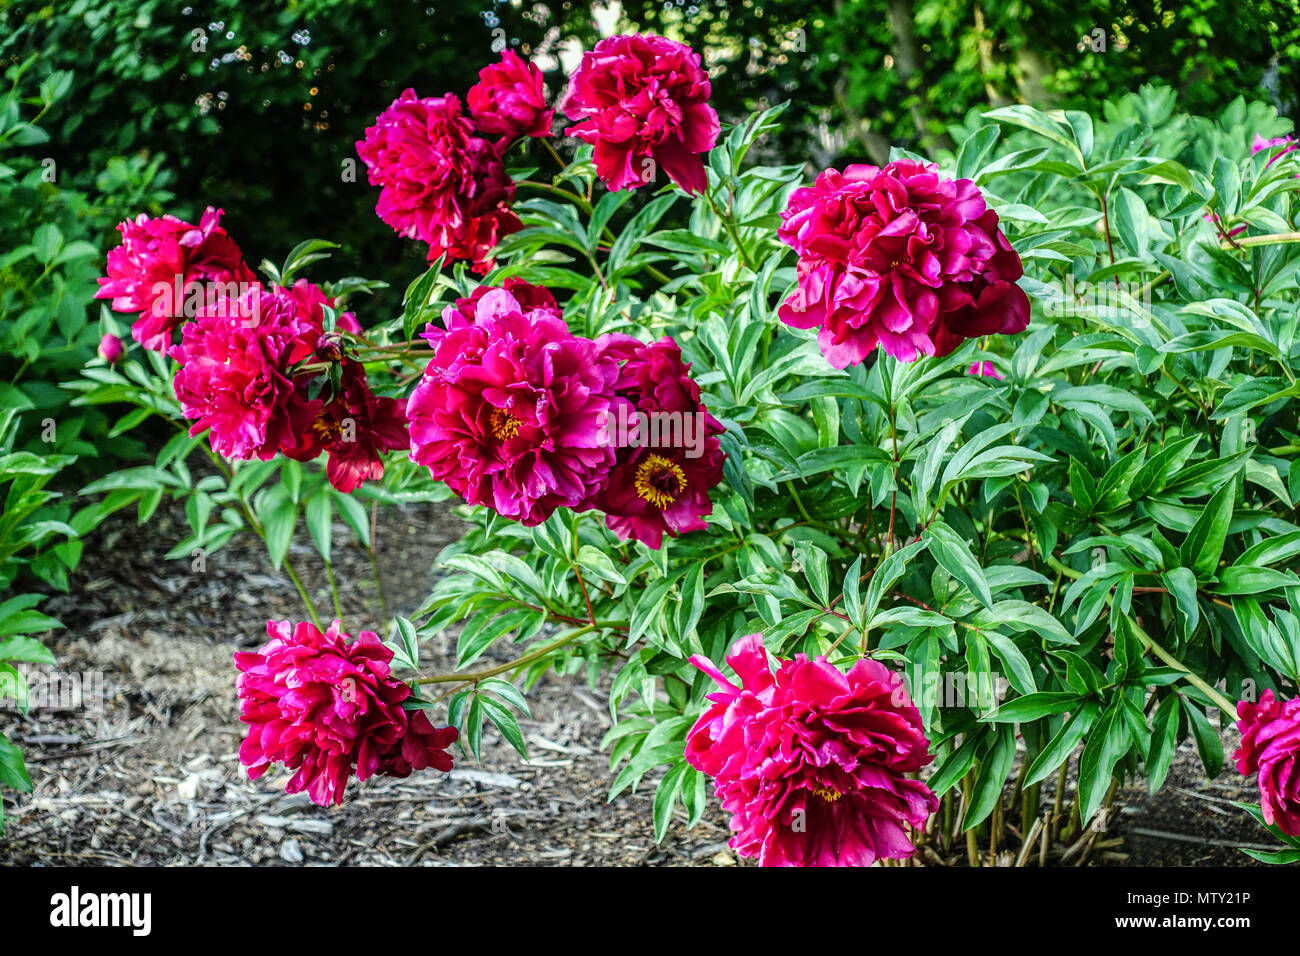 Red peonies Paeonia lactiflora ' Cherry Hill ' flowering in a garden, Red peony Stock Photo